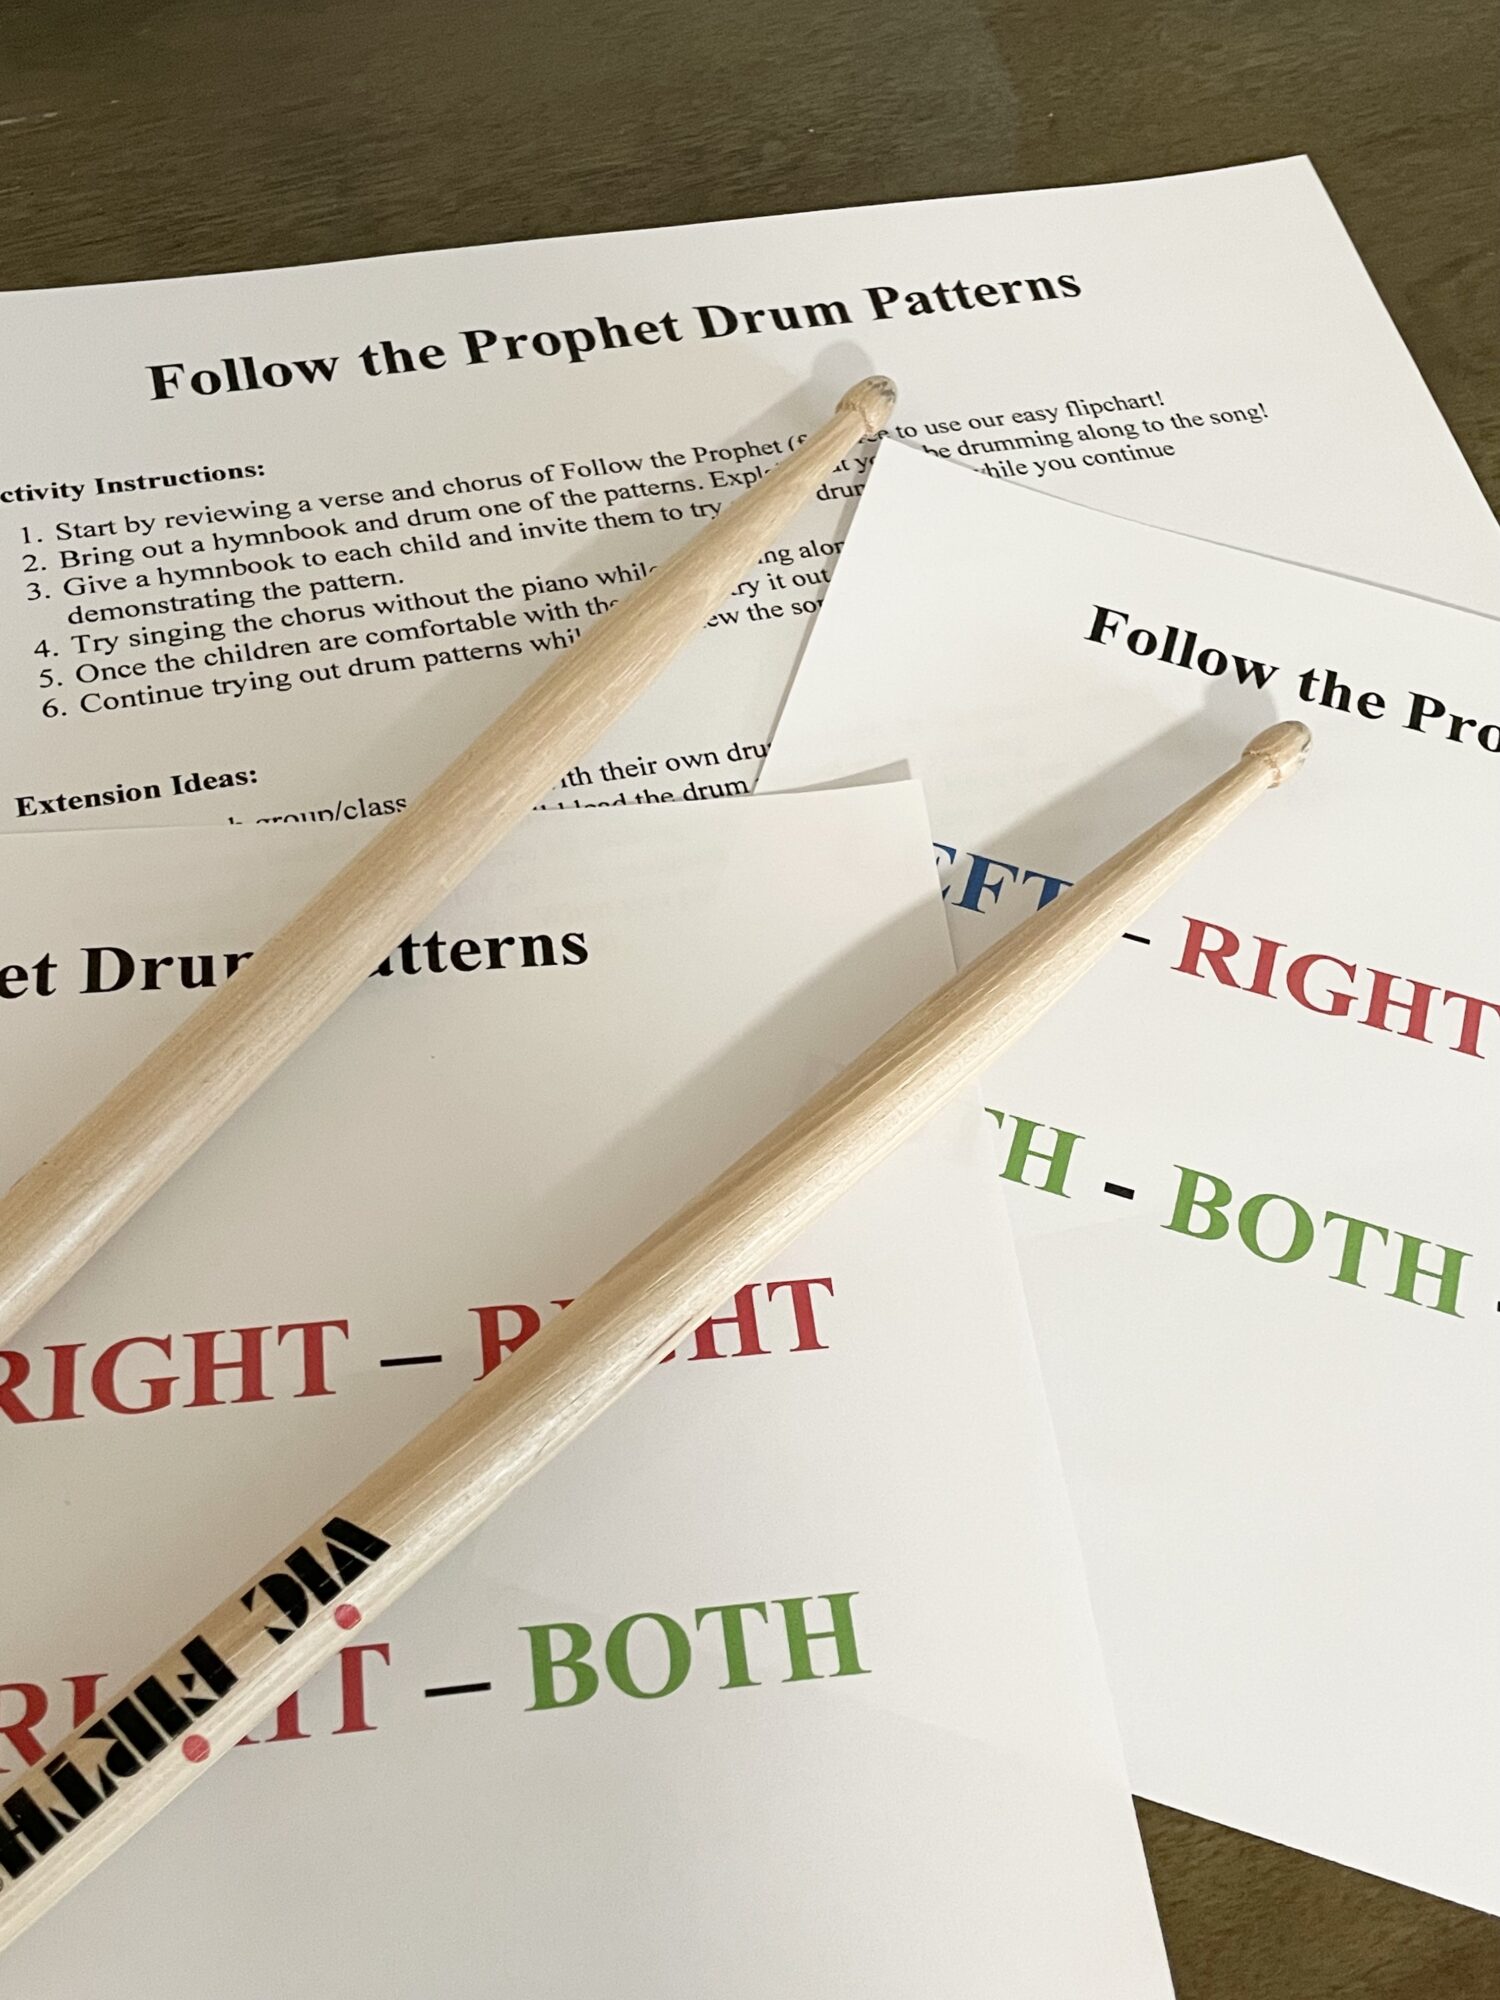 Follow the Prophet Drum Patterns singing time ideas for LDS Primary music leaders with printable song helps. Beat along with the pattern using pencils, chopsticks or drumsticks with these fun variety of beat patterns.